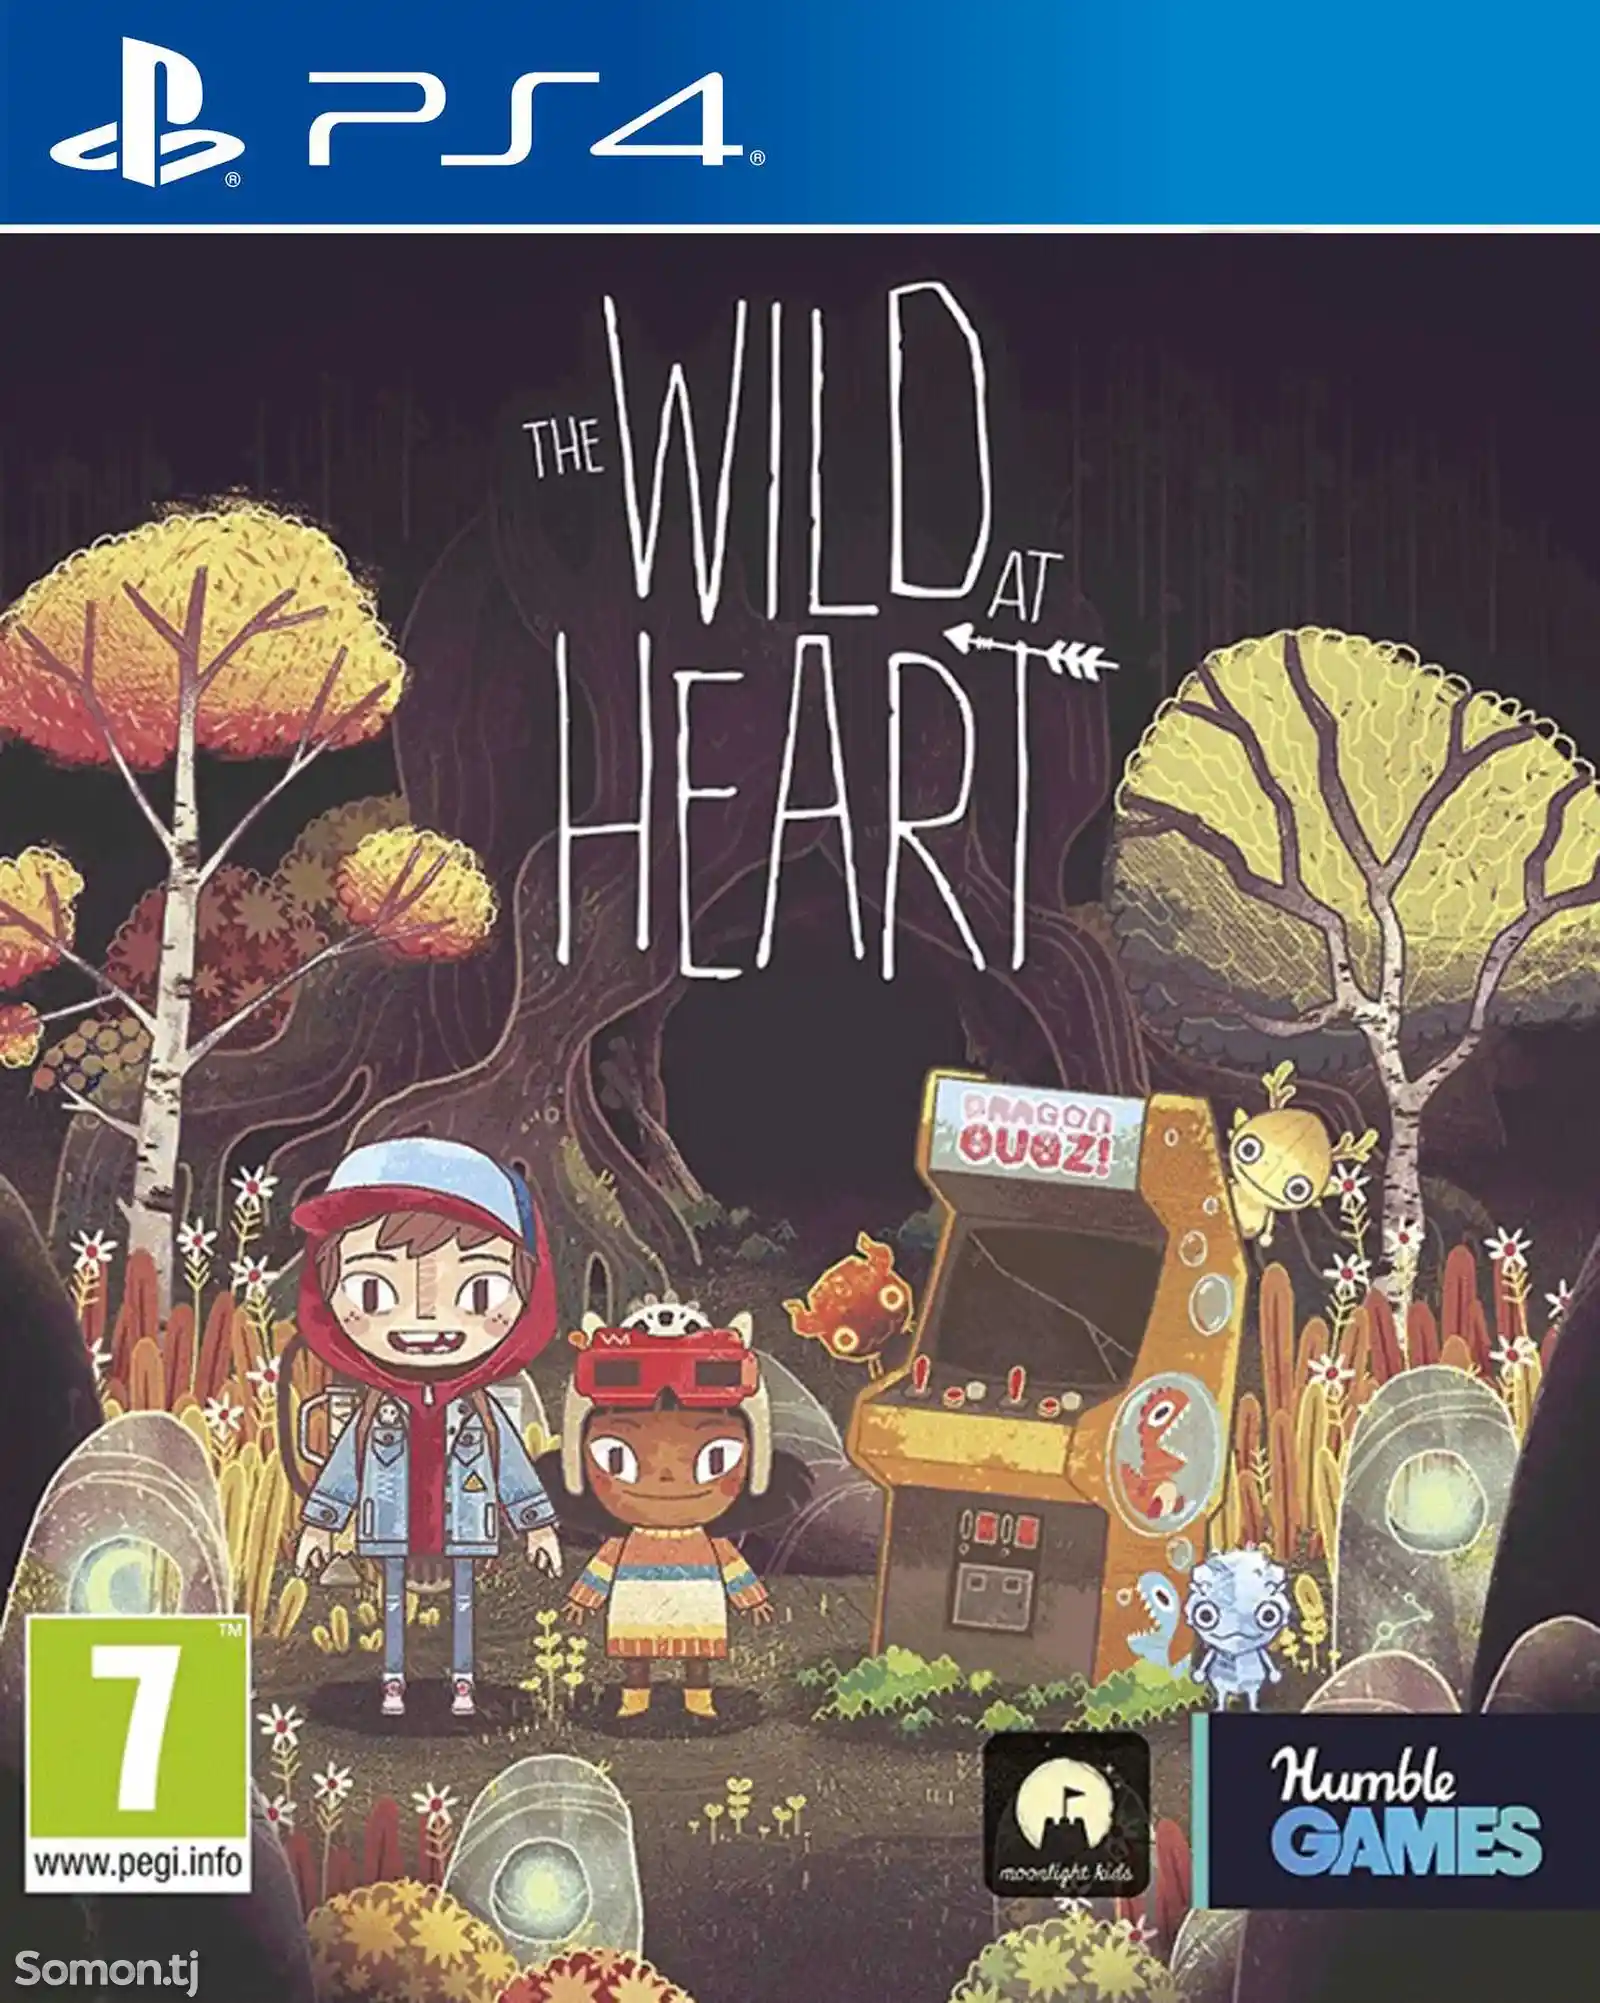 Игра The wild at heart для PS-4 / 5.05 / 6.72 / 7.02 / 7.55 / 9.00 /-1